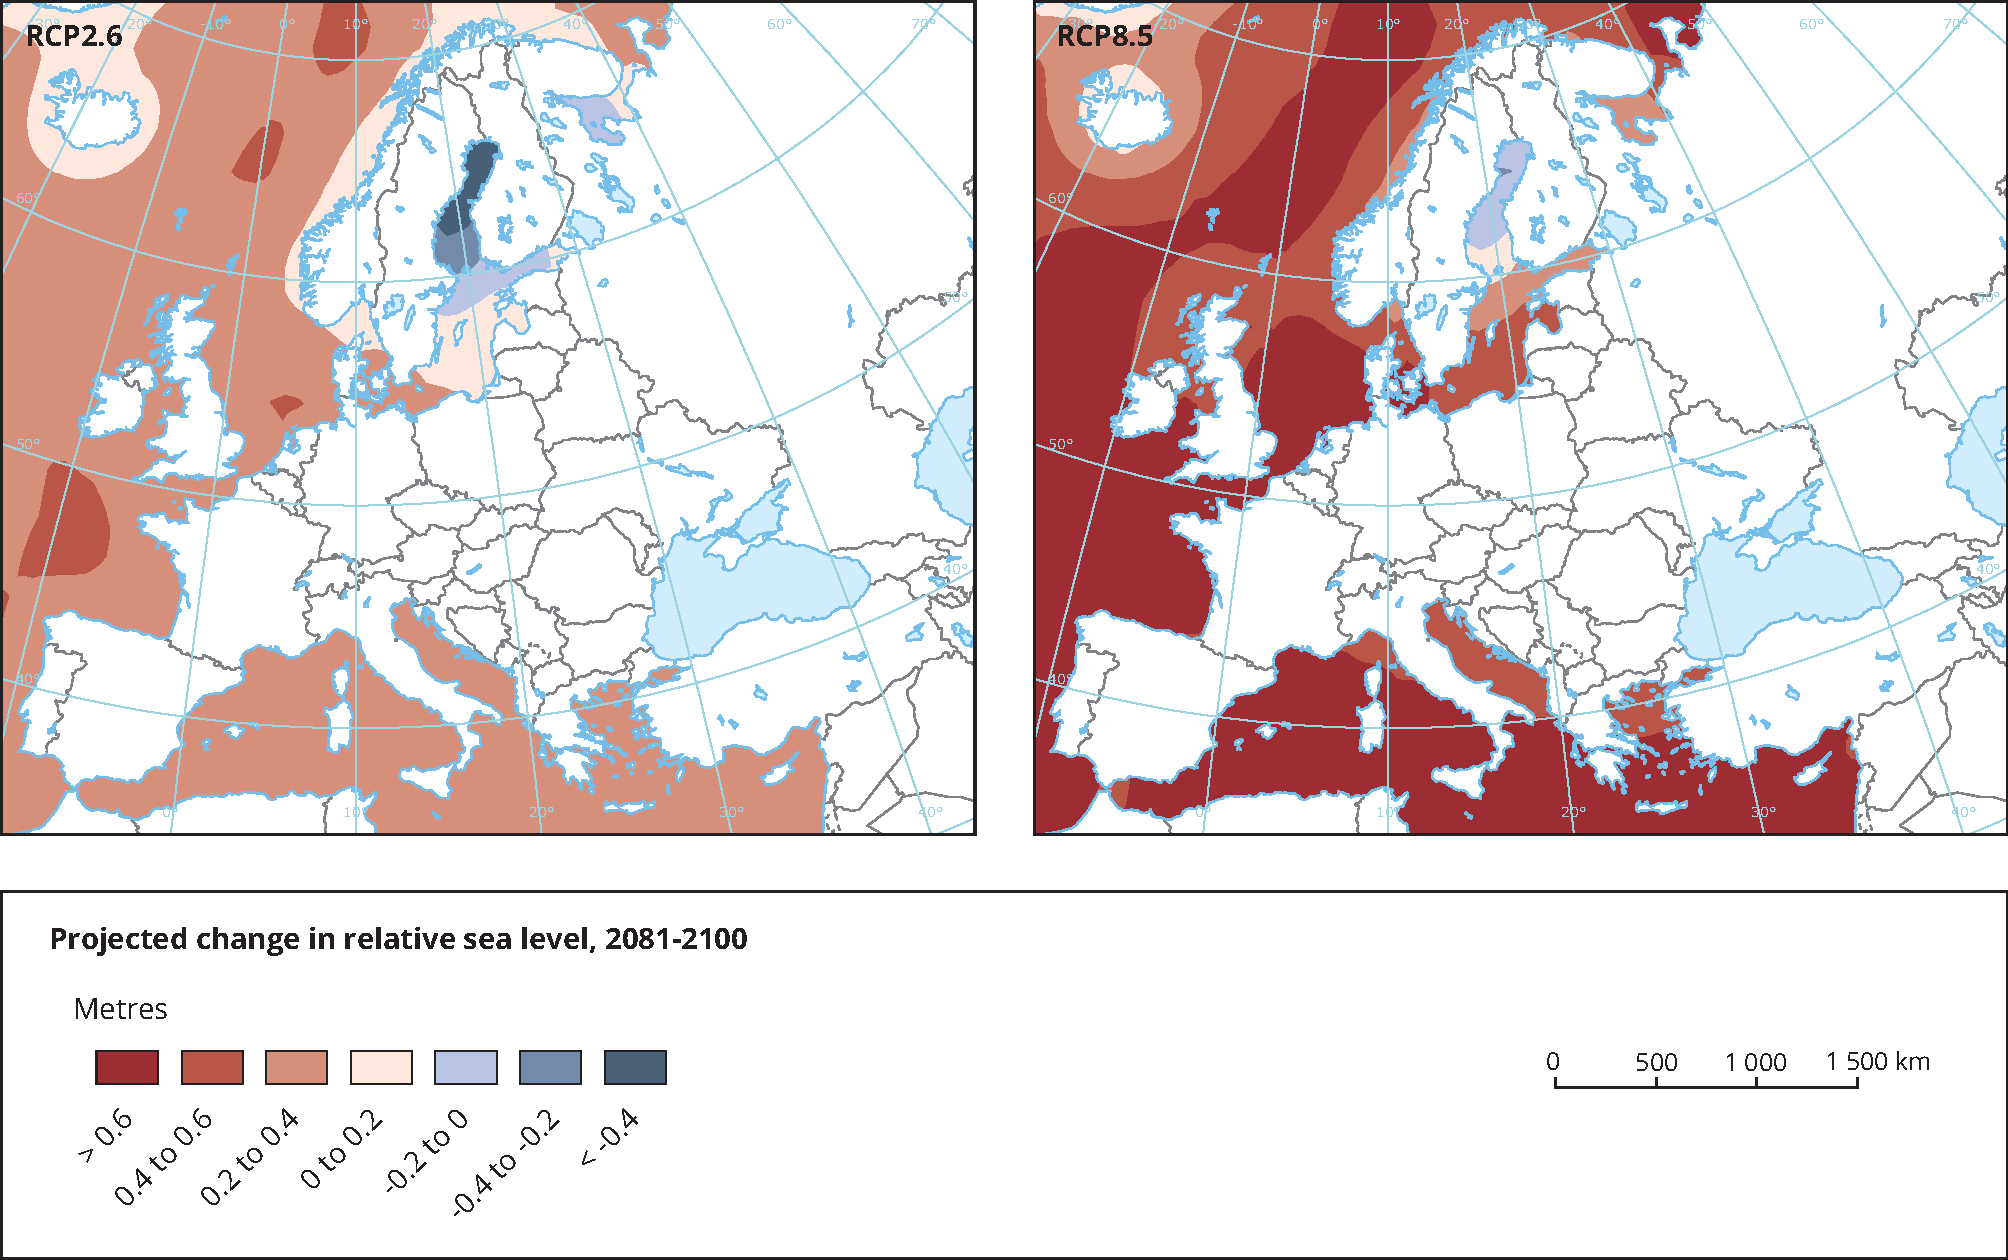 Projected change in relative sea level, 2081-2100